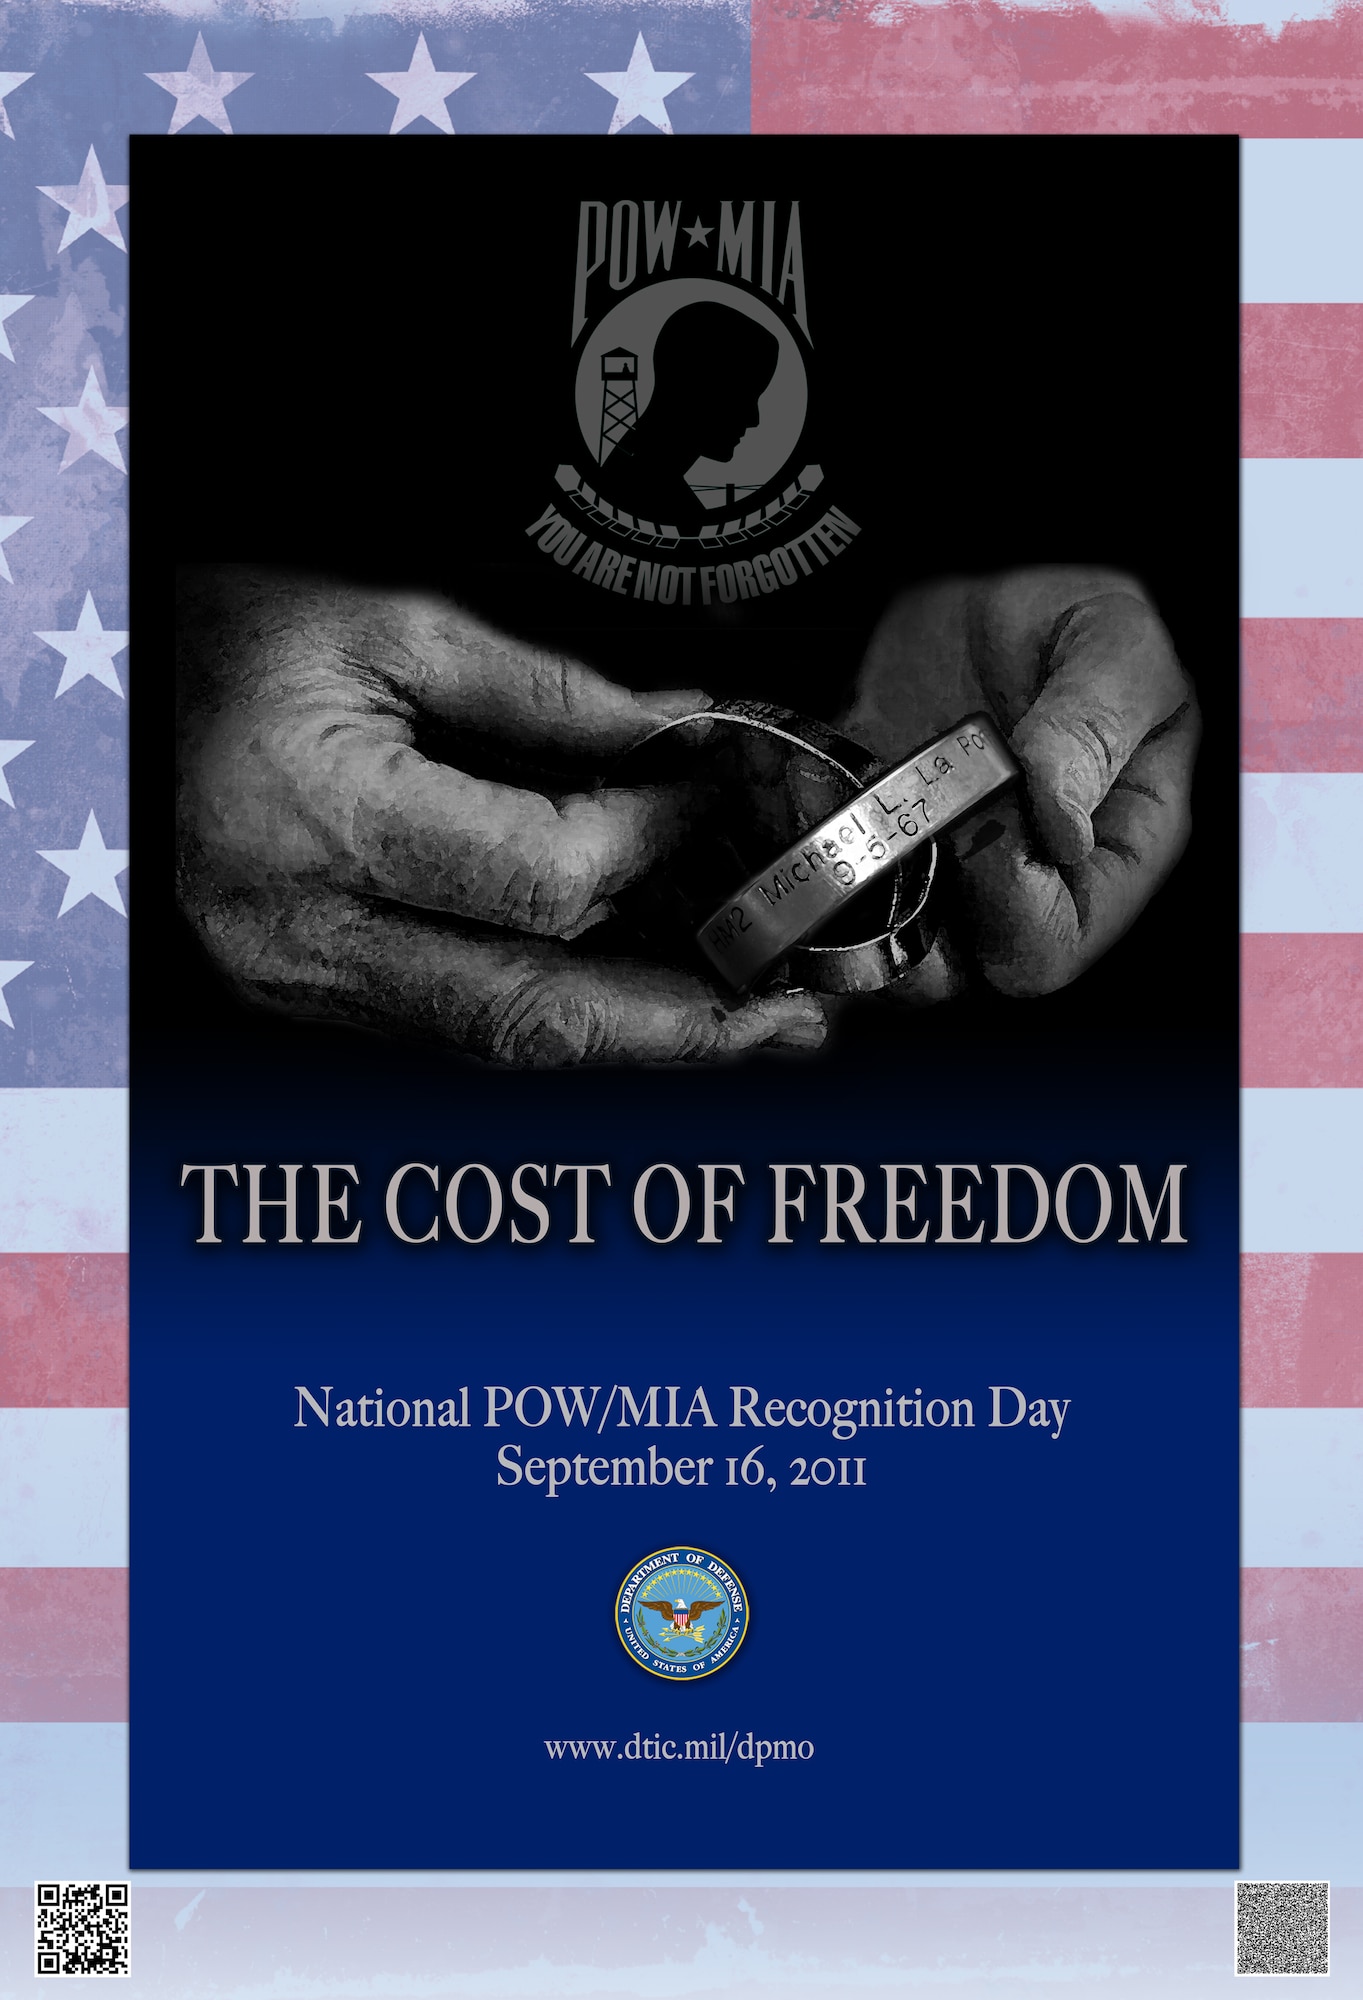 2011 National POW/MIA Recognition Day poster.